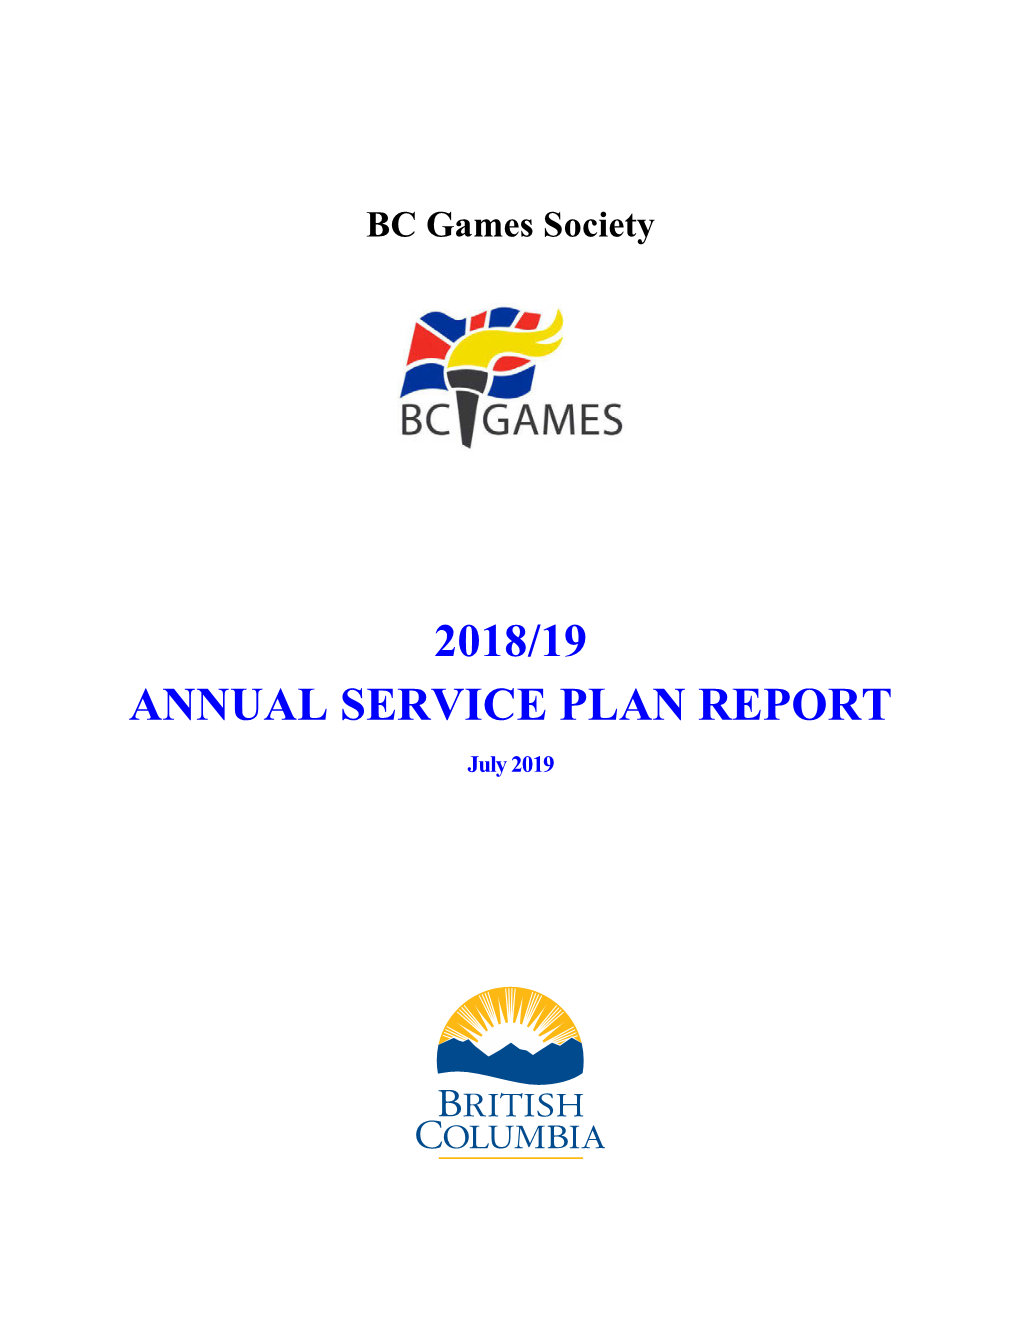 BC Games Society 2018/19 Annual Service Plan Report